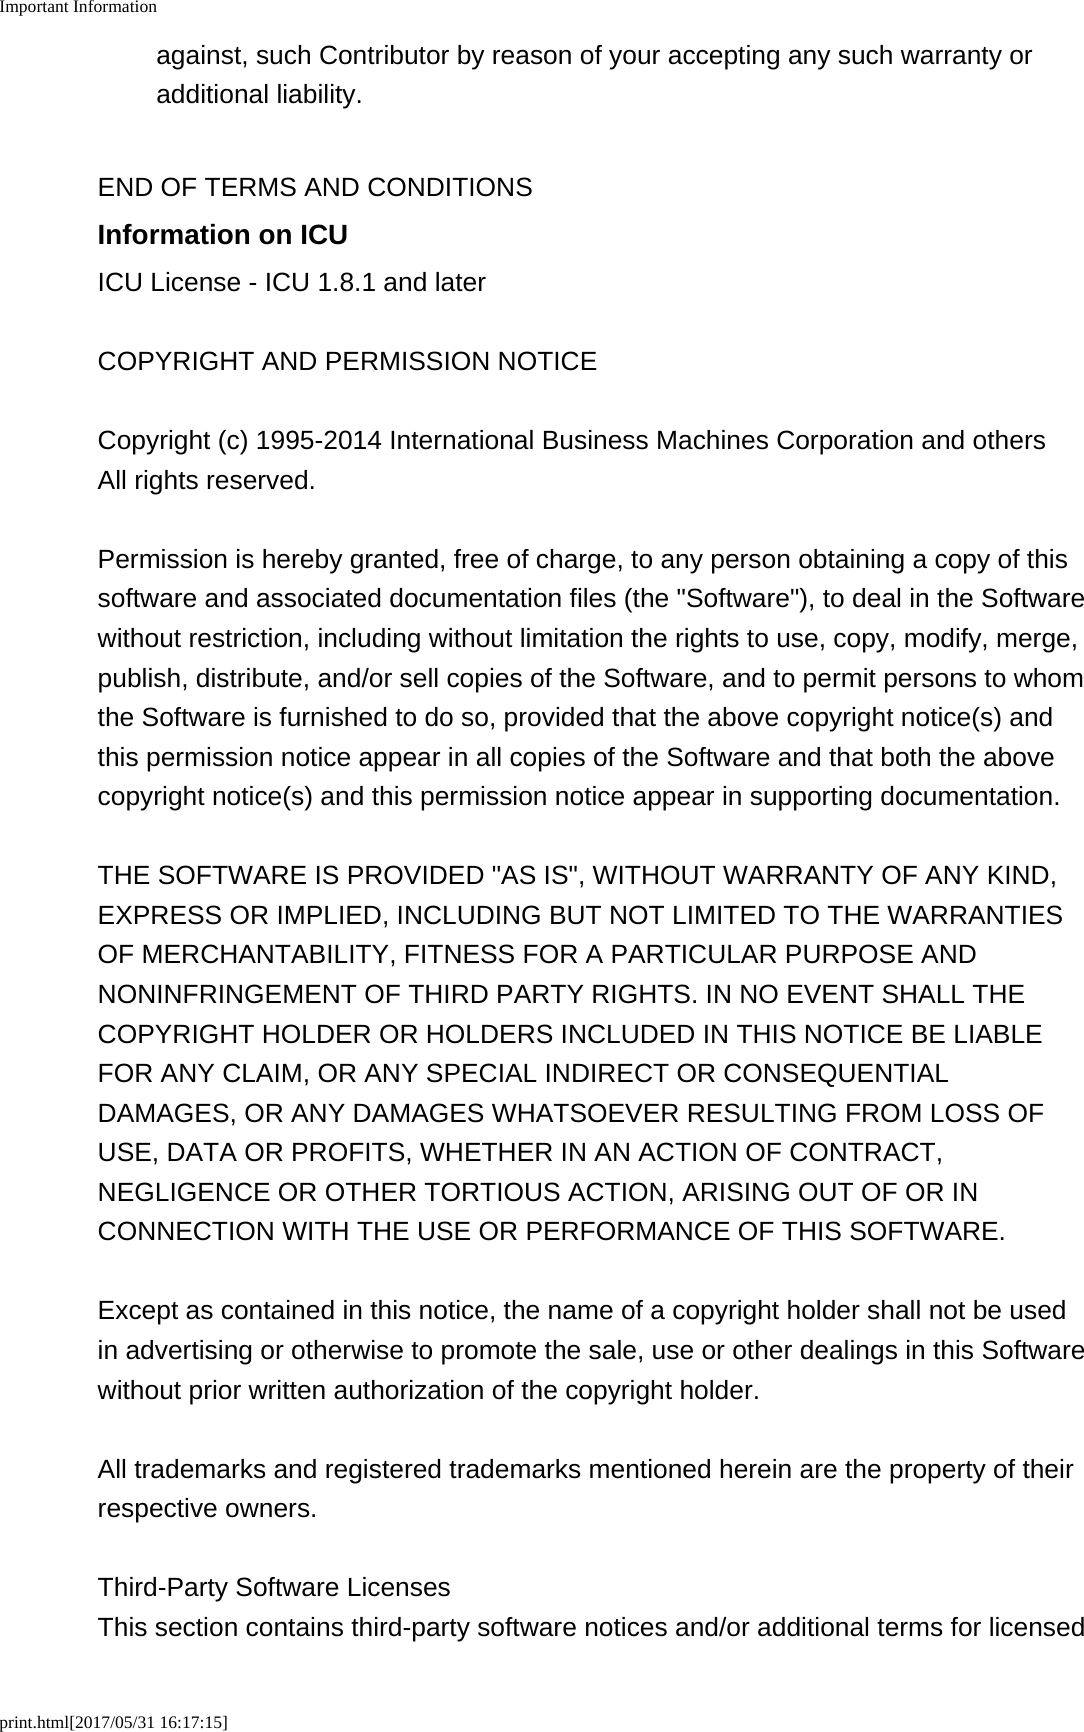 Important Informationprint.html[2017/05/31 16:17:15]against, such Contributor by reason of your accepting any such warranty oradditional liability.END OF TERMS AND CONDITIONSInformation on ICUICU License - ICU 1.8.1 and laterCOPYRIGHT AND PERMISSION NOTICECopyright (c) 1995-2014 International Business Machines Corporation and othersAll rights reserved.Permission is hereby granted, free of charge, to any person obtaining a copy of thissoftware and associated documentation files (the &quot;Software&quot;), to deal in the Softwarewithout restriction, including without limitation the rights to use, copy, modify, merge,publish, distribute, and/or sell copies of the Software, and to permit persons to whomthe Software is furnished to do so, provided that the above copyright notice(s) andthis permission notice appear in all copies of the Software and that both the abovecopyright notice(s) and this permission notice appear in supporting documentation.THE SOFTWARE IS PROVIDED &quot;AS IS&quot;, WITHOUT WARRANTY OF ANY KIND,EXPRESS OR IMPLIED, INCLUDING BUT NOT LIMITED TO THE WARRANTIESOF MERCHANTABILITY, FITNESS FOR A PARTICULAR PURPOSE ANDNONINFRINGEMENT OF THIRD PARTY RIGHTS. IN NO EVENT SHALL THECOPYRIGHT HOLDER OR HOLDERS INCLUDED IN THIS NOTICE BE LIABLEFOR ANY CLAIM, OR ANY SPECIAL INDIRECT OR CONSEQUENTIALDAMAGES, OR ANY DAMAGES WHATSOEVER RESULTING FROM LOSS OFUSE, DATA OR PROFITS, WHETHER IN AN ACTION OF CONTRACT,NEGLIGENCE OR OTHER TORTIOUS ACTION, ARISING OUT OF OR INCONNECTION WITH THE USE OR PERFORMANCE OF THIS SOFTWARE.Except as contained in this notice, the name of a copyright holder shall not be usedin advertising or otherwise to promote the sale, use or other dealings in this Softwarewithout prior written authorization of the copyright holder.All trademarks and registered trademarks mentioned herein are the property of theirrespective owners.Third-Party Software LicensesThis section contains third-party software notices and/or additional terms for licensed